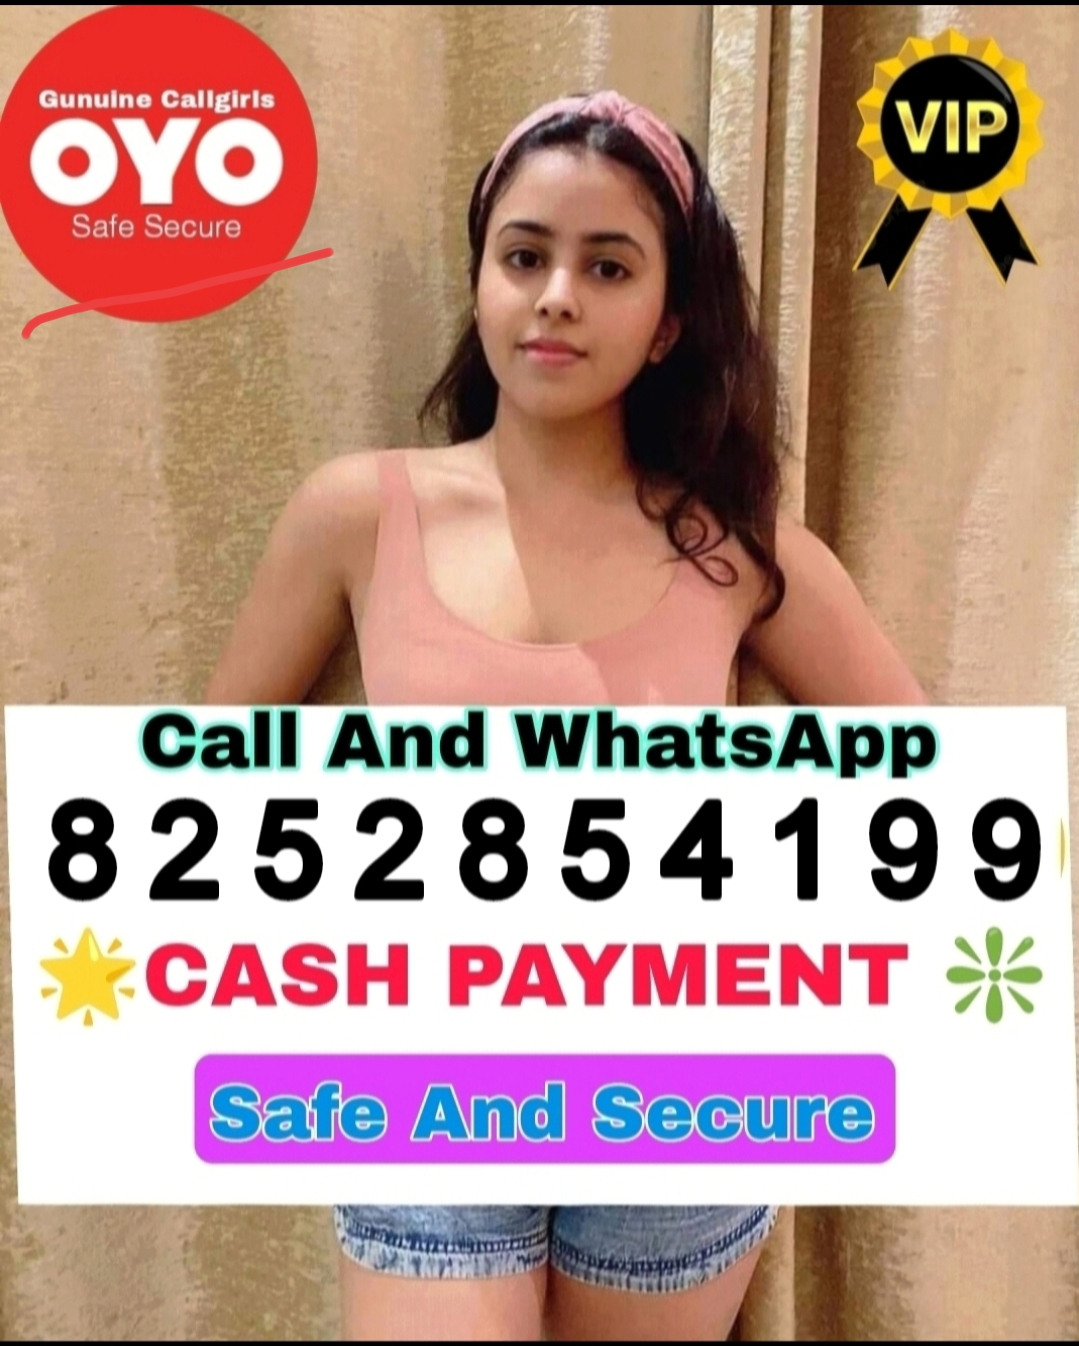 TODAY LOW PRICE  GENUINE CALL GIRL SAFE AND SECURE AVAILABLE  AF ft fo